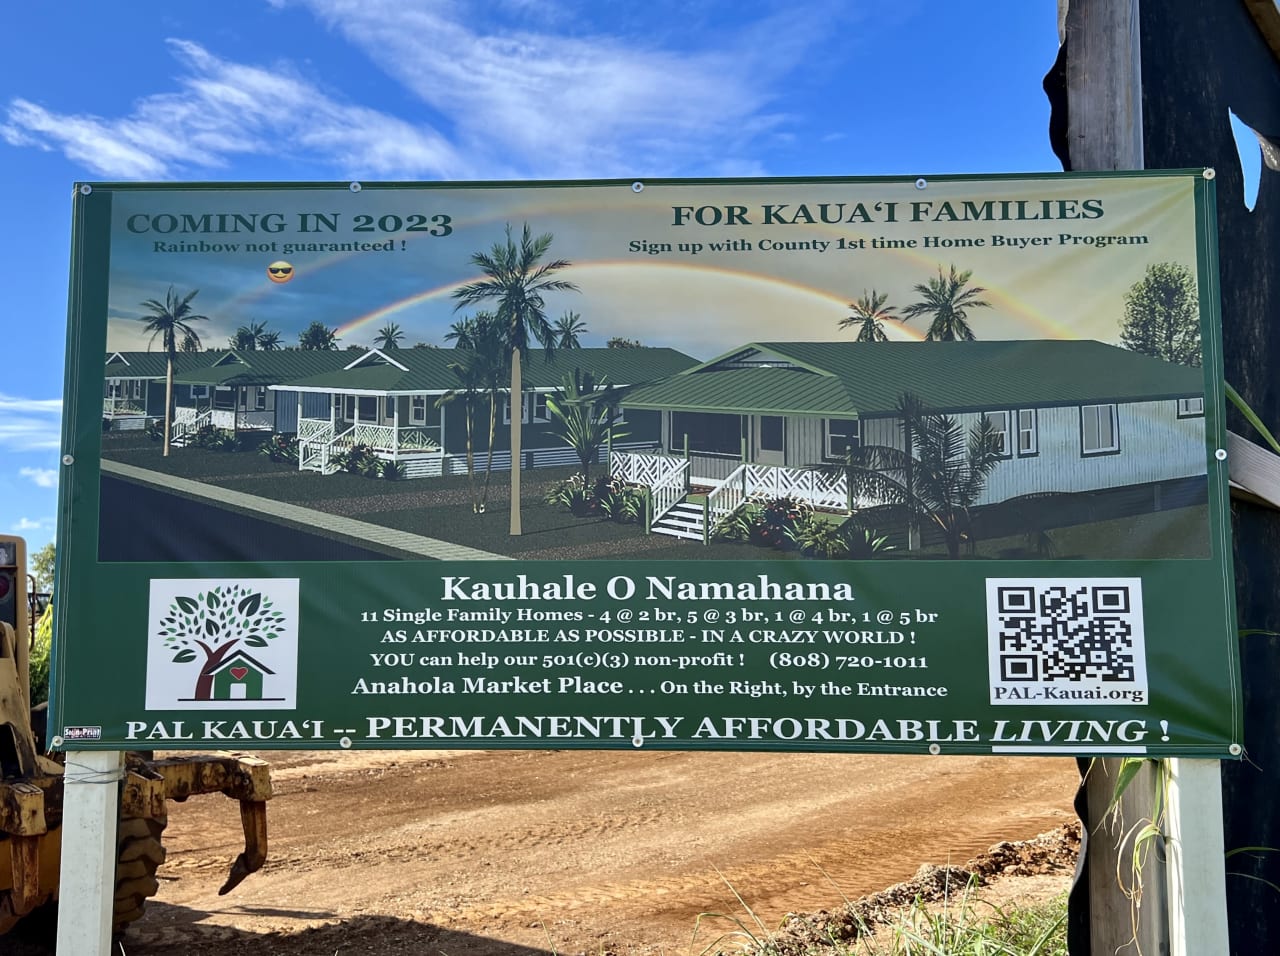 New affordable homes coming to Kilauea